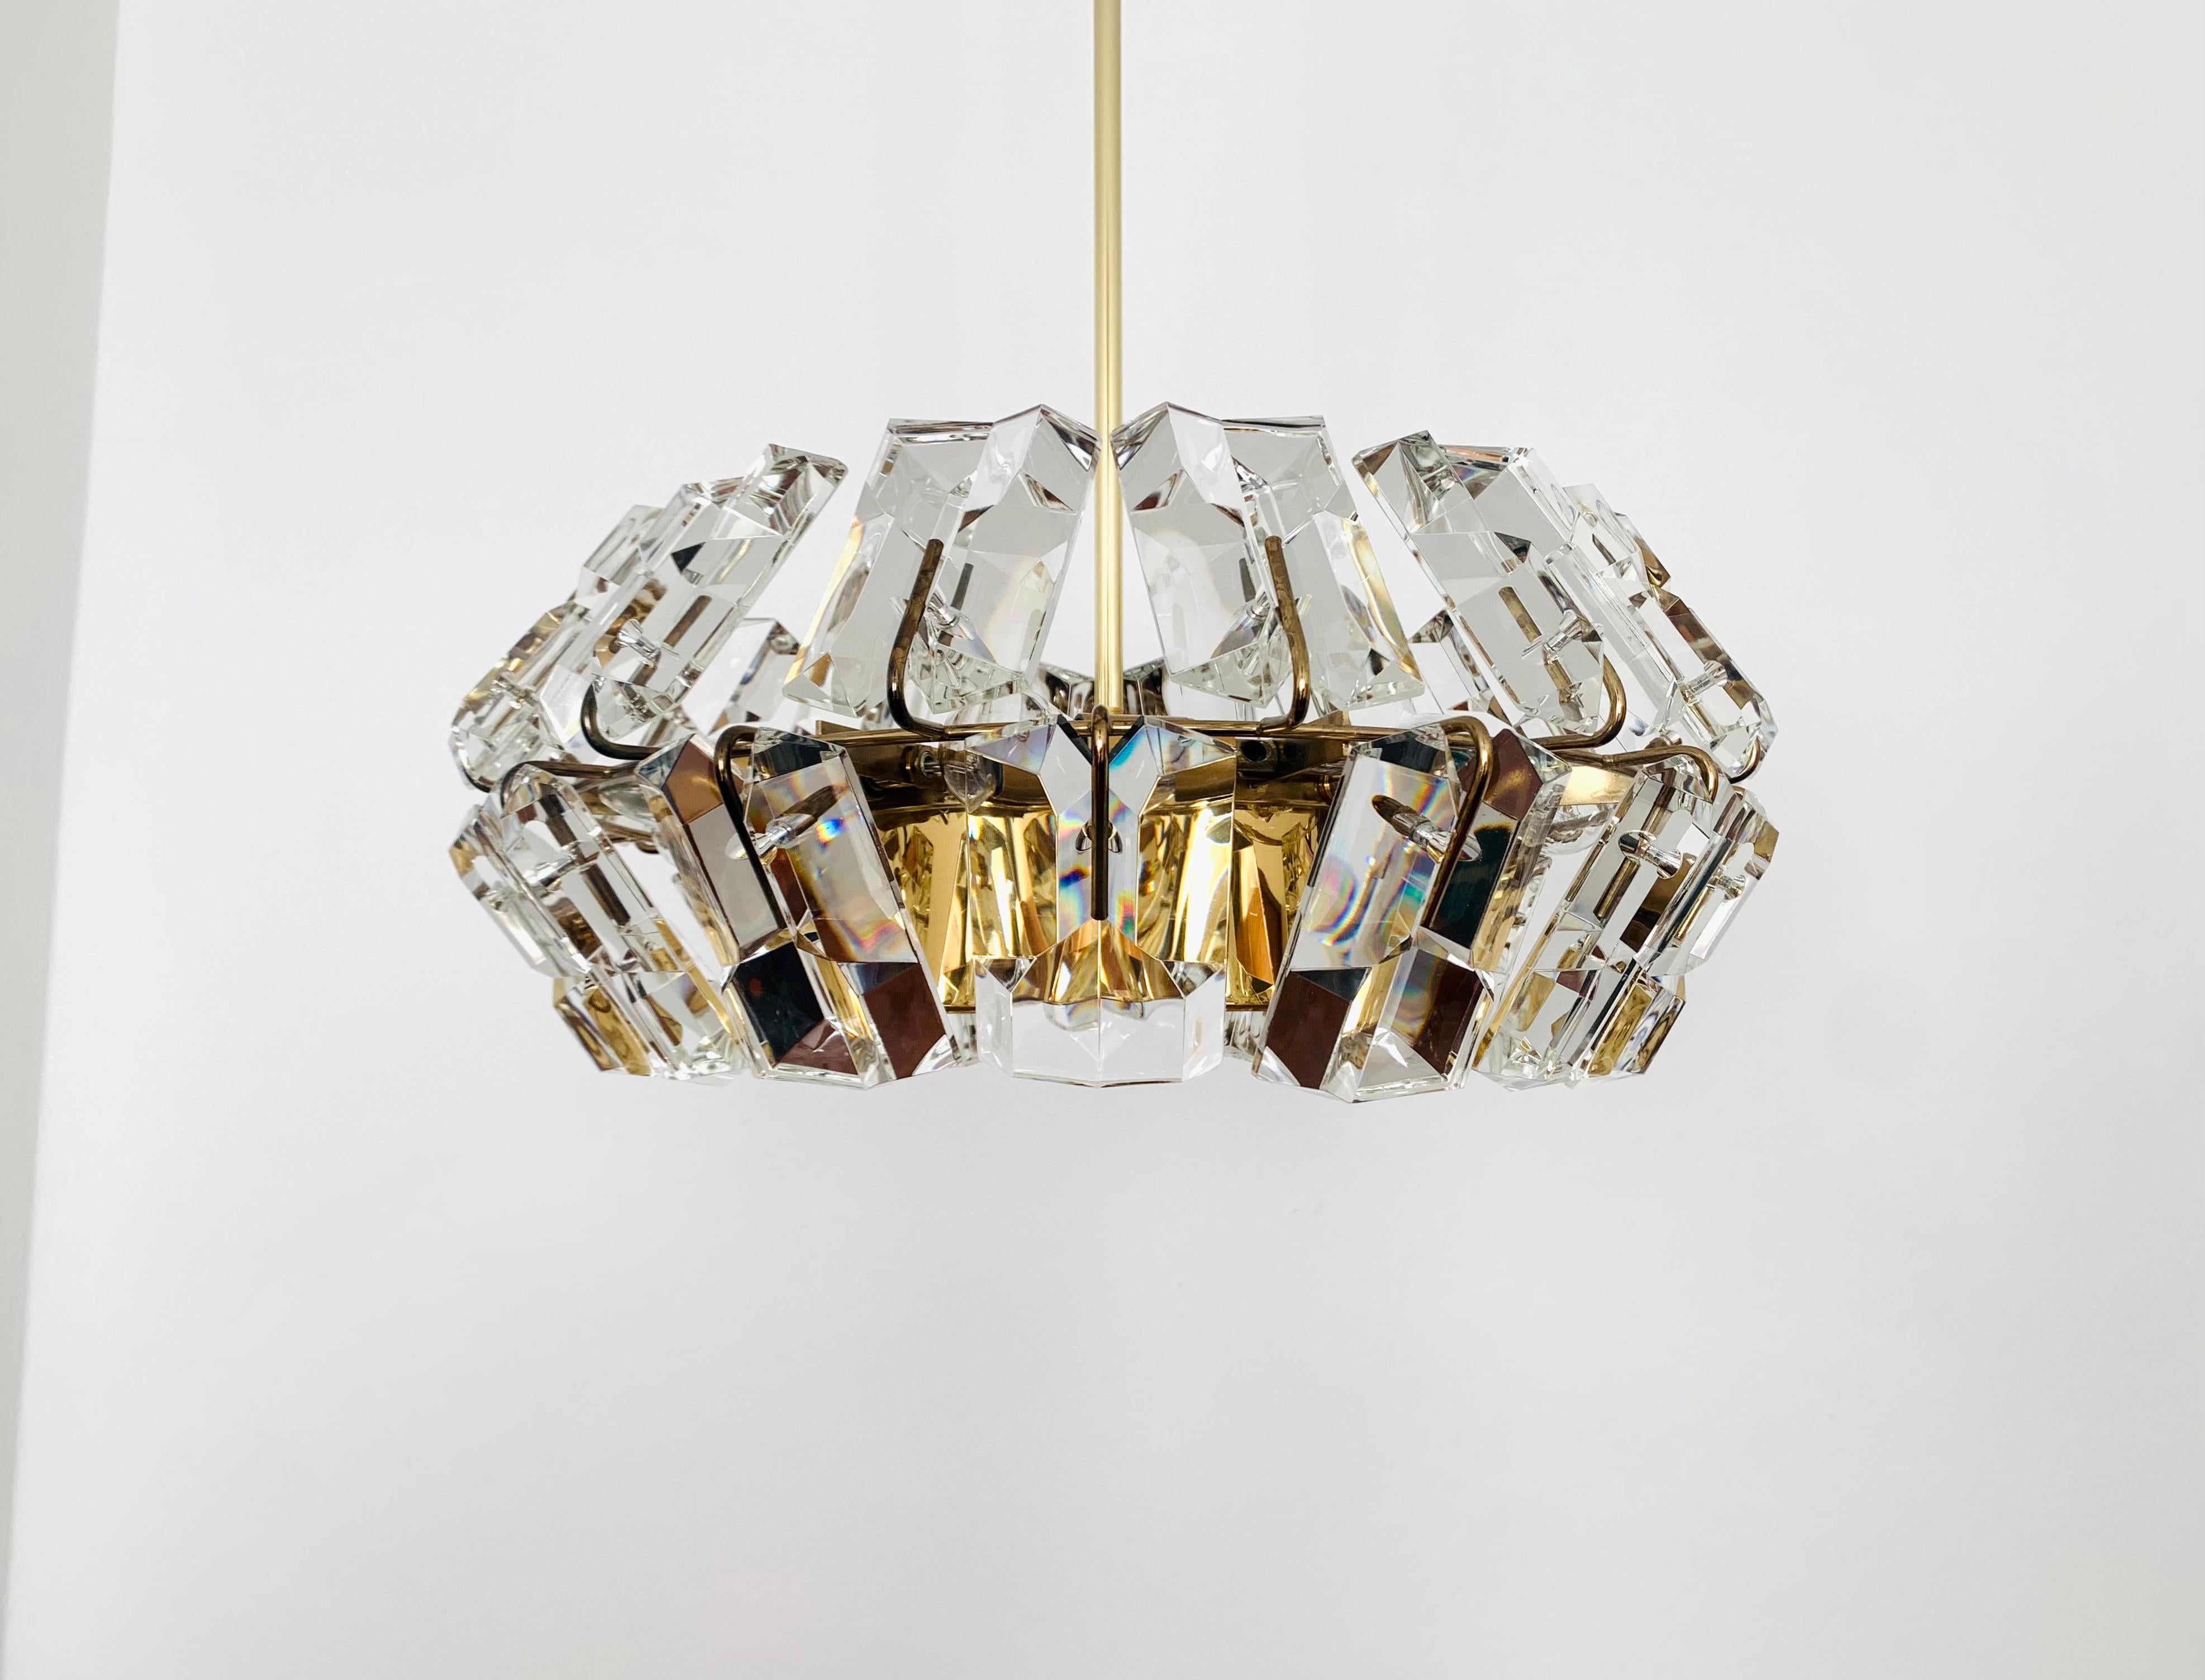 Unique chandelier from the 1960s.
Extraordinarily successful design and very high-quality workmanship.
The 28 crystals spread a spectacular play of light in the room.
Very luxurious and an asset to any home.

Condition:

Very good vintage